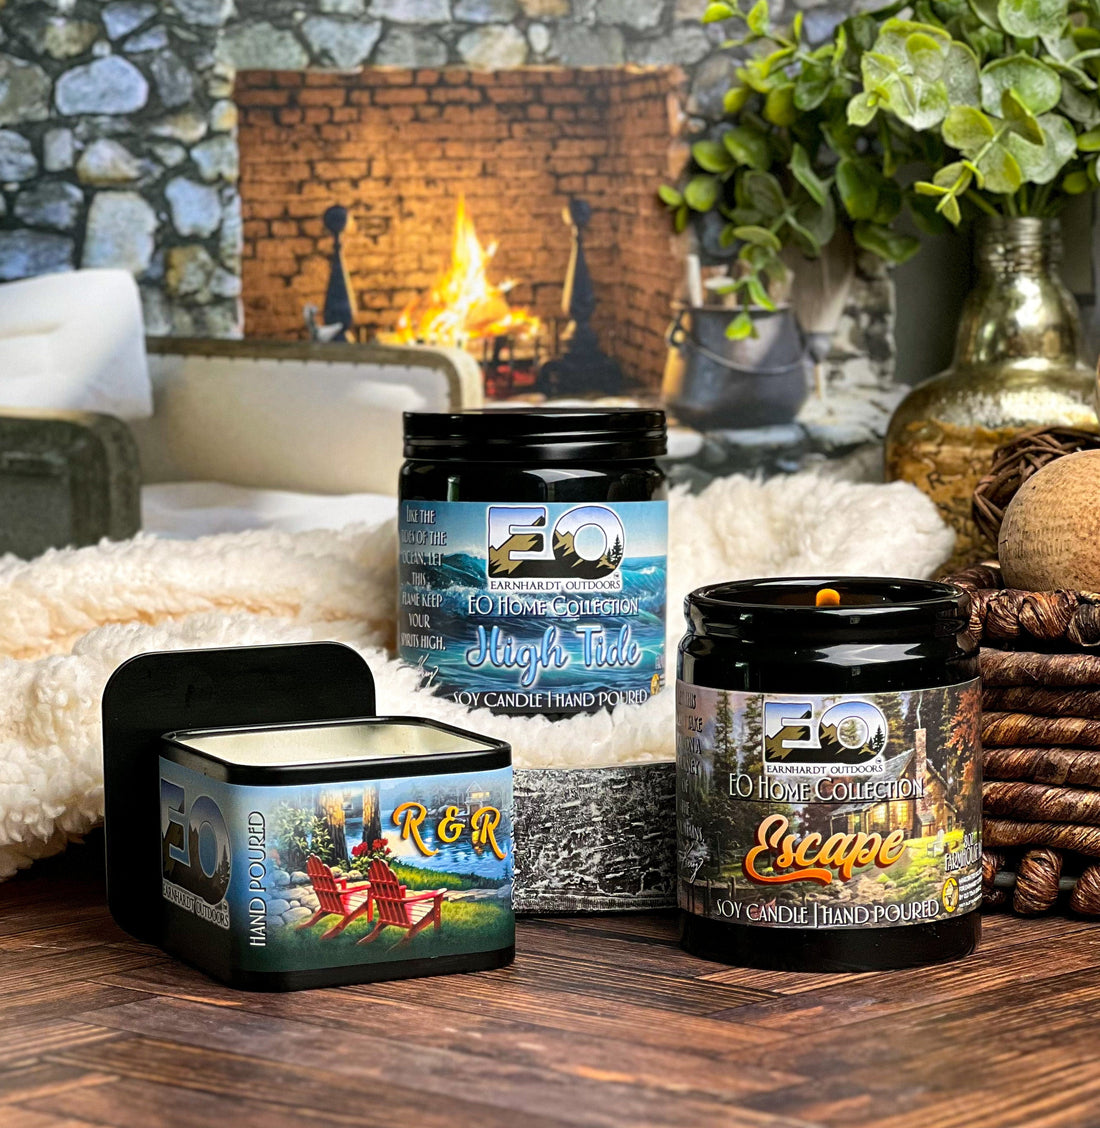 The Lodge Candle EO Home Collection - Old Town Soap Co.